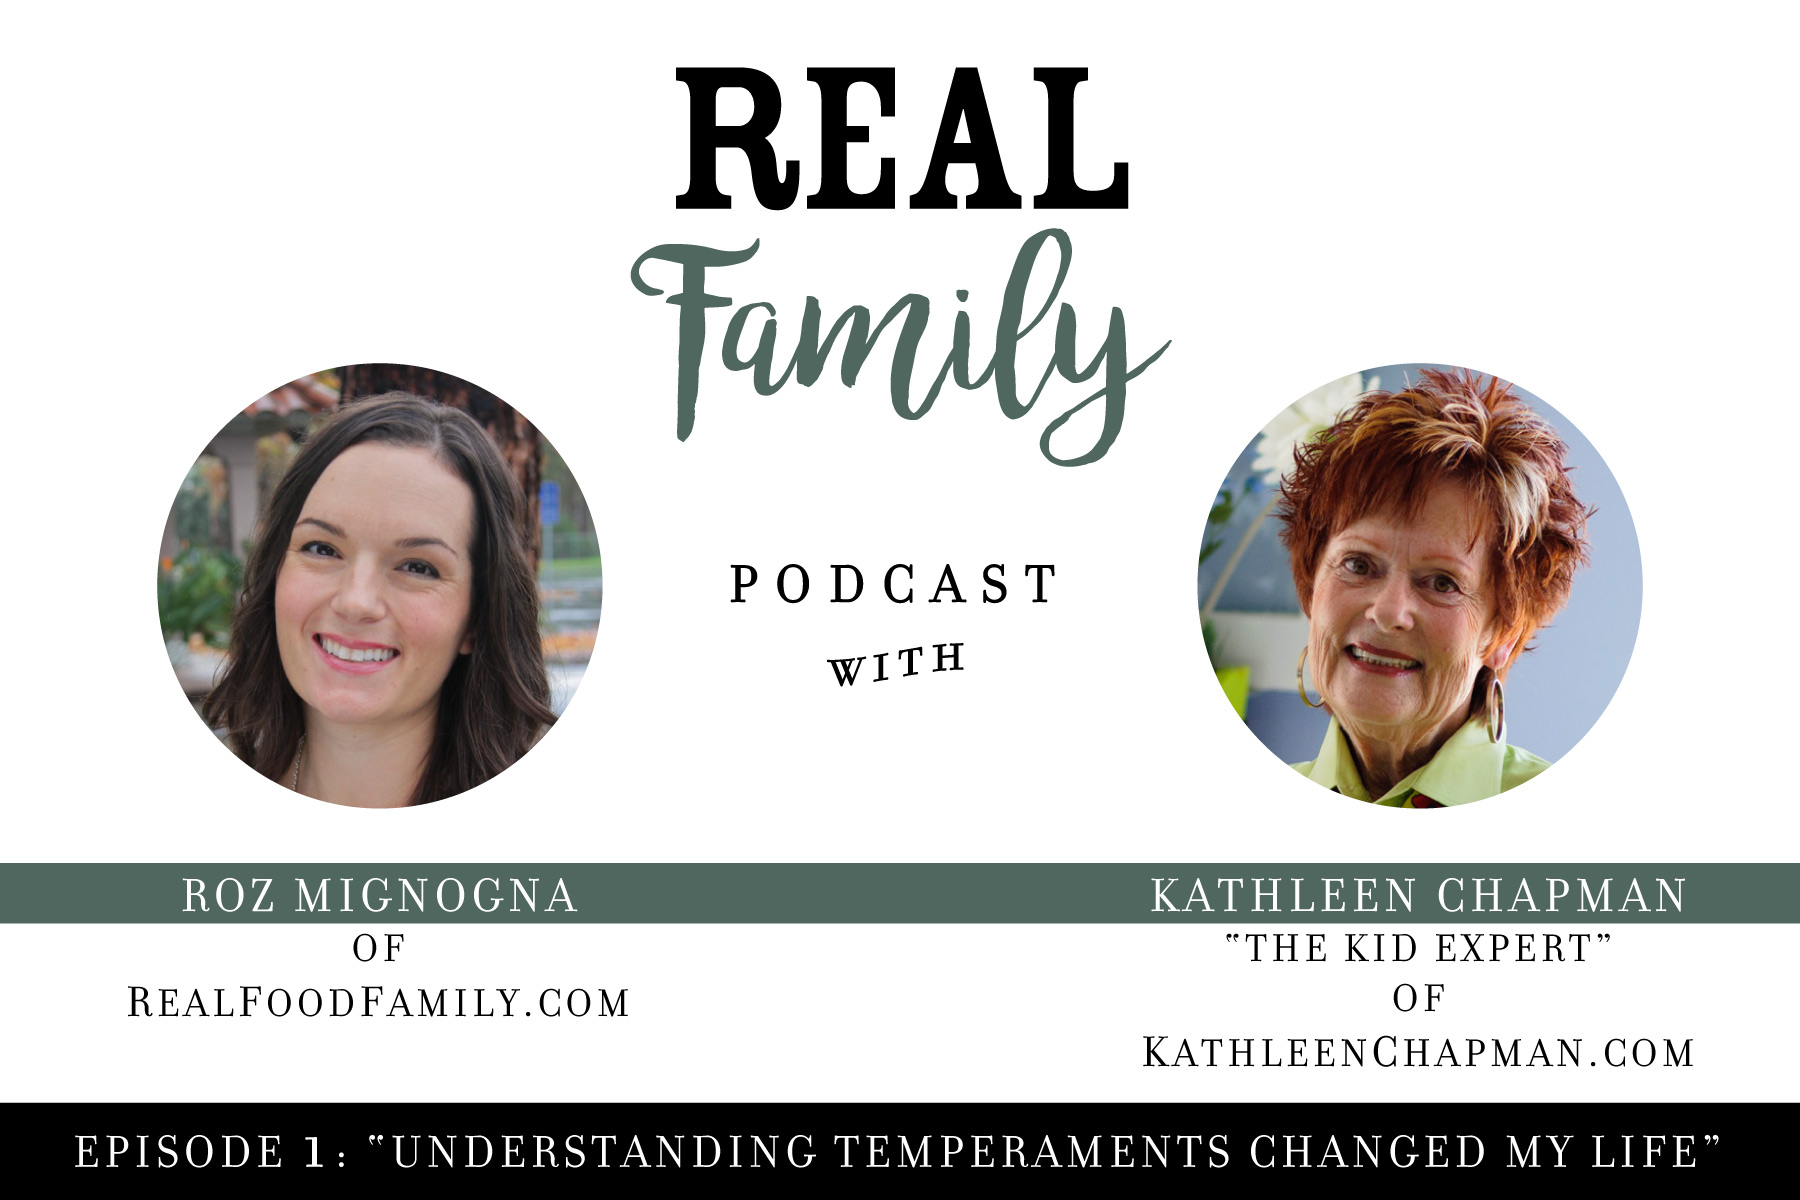 REAL FAMILY Podcast: Episode 1